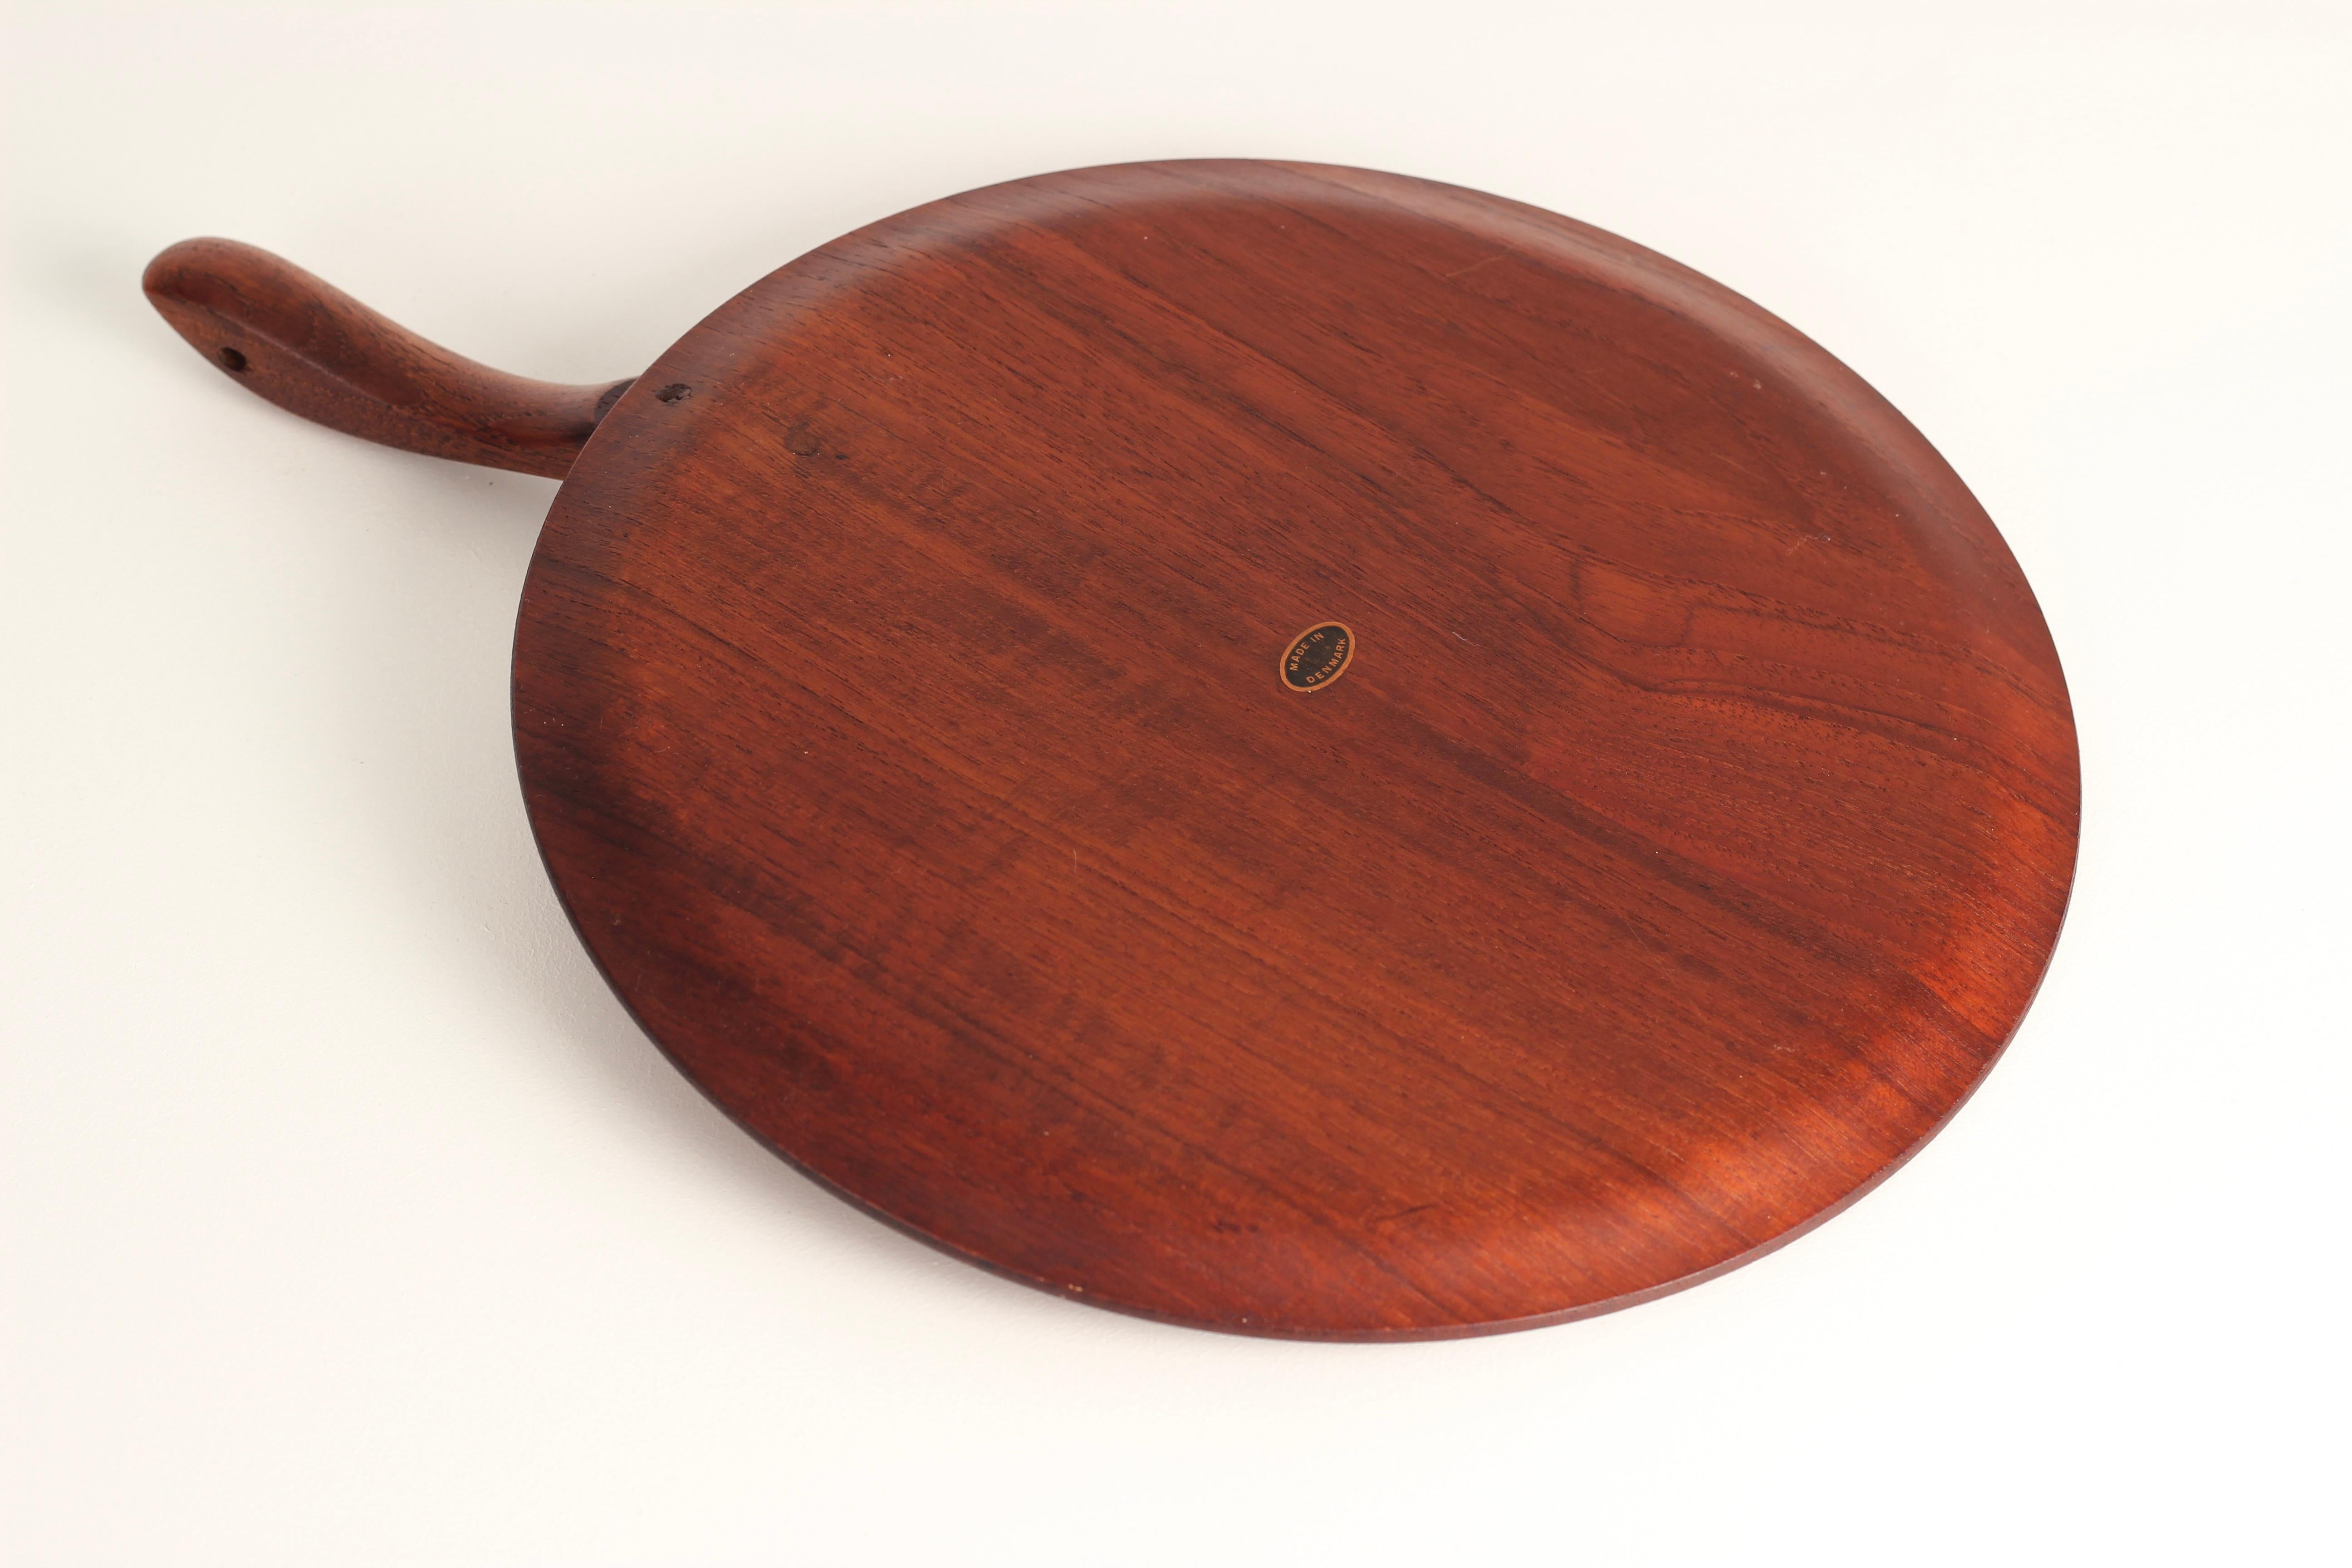 A Danish Mid-Century Modern Scandinavian design serving platter or cheese board in the style of Kay Bojesen. A sleekly designed handle with a hole for a strap to hang, glides over the top of a steam bent circular plate with angled profiled edges.